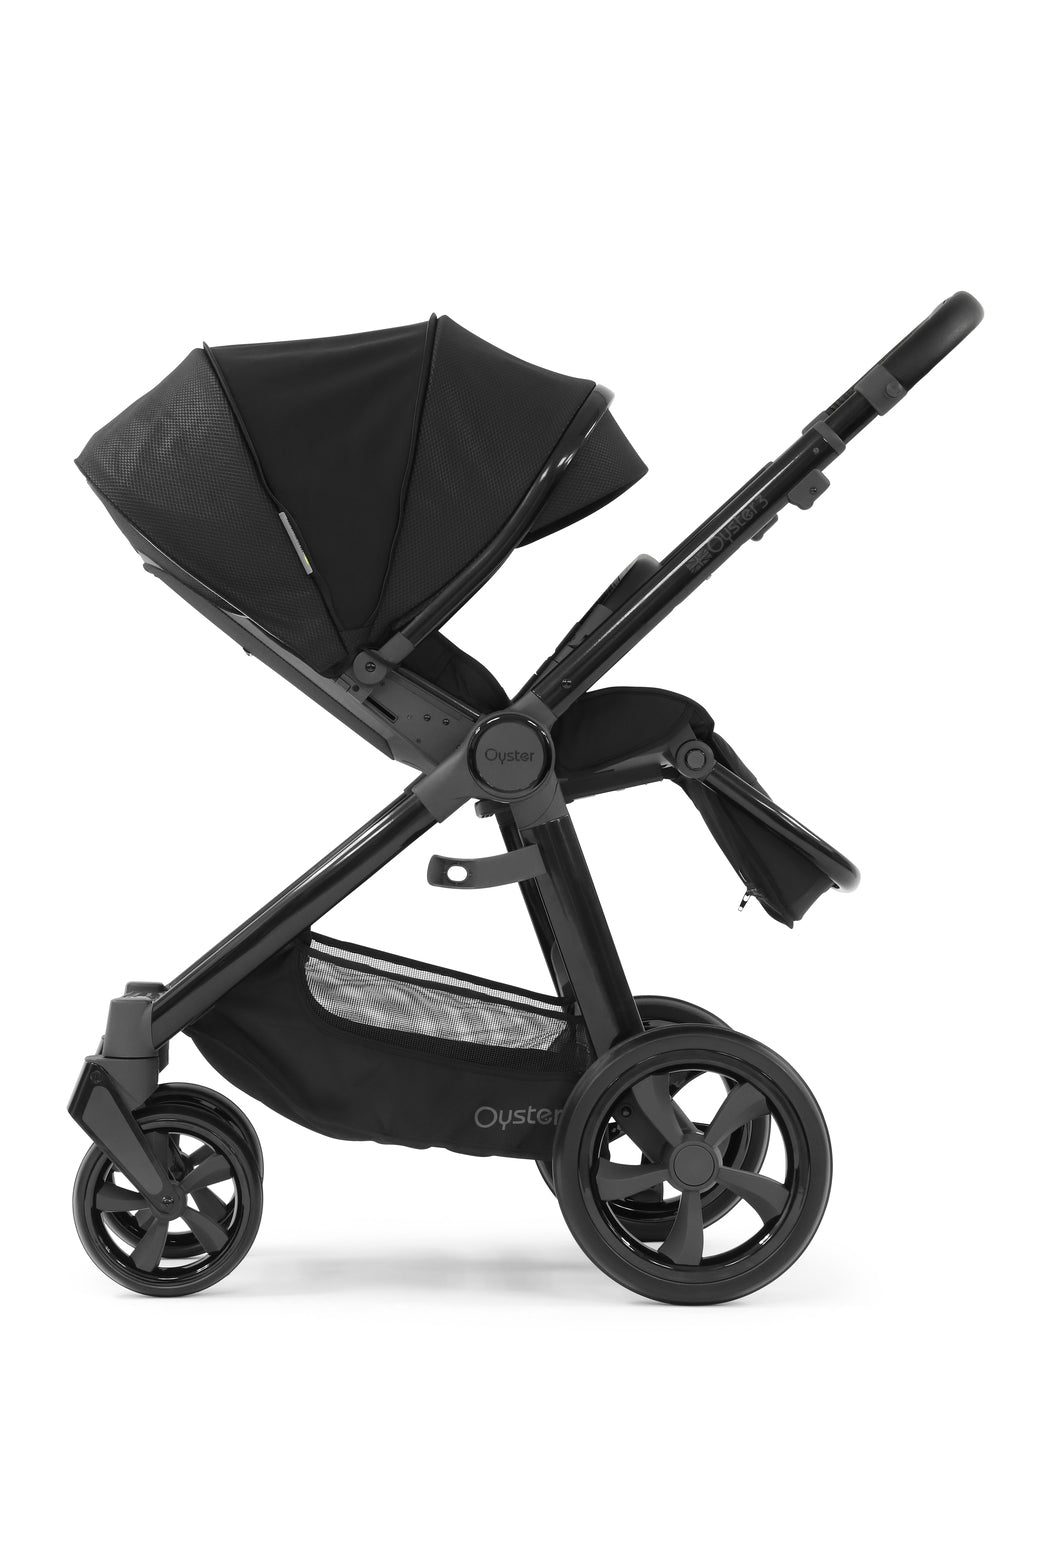 Babystyle Oyster 3 Ultimate 12 Piece Travel System Bundle With Cloud T - Pixel - For Your Little One